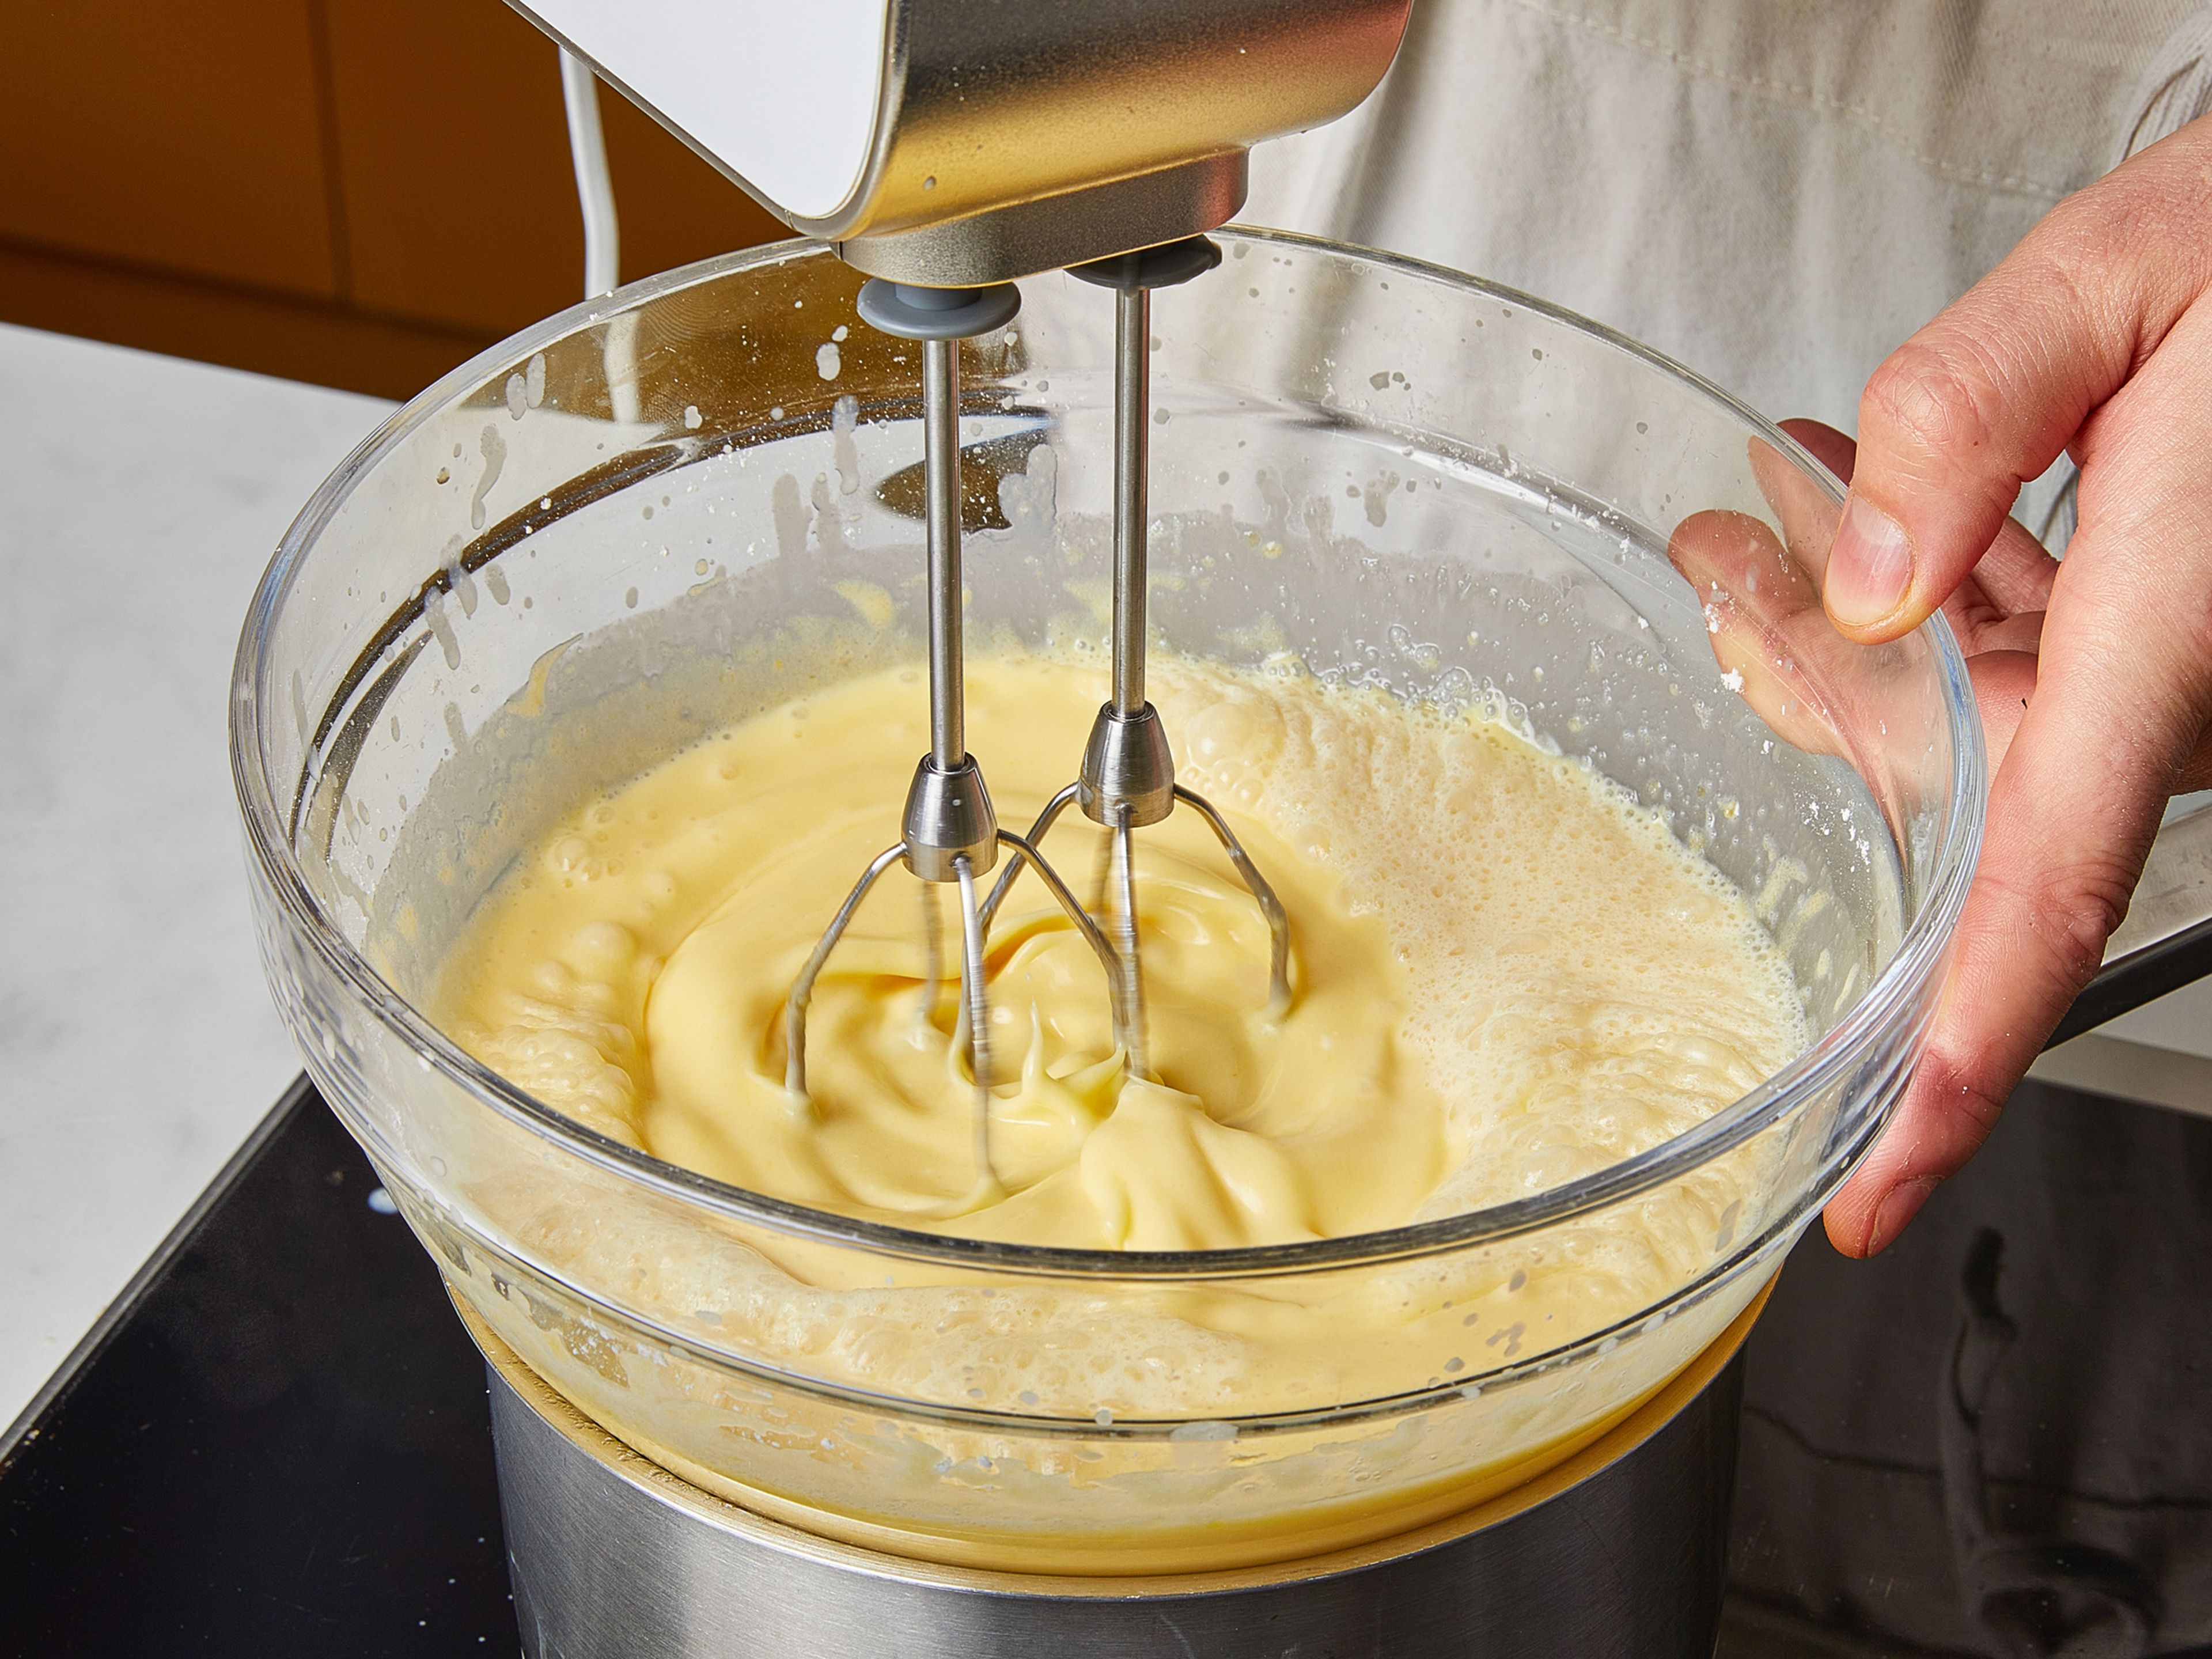 Remove the bowl from the pot. Add heavy cream and evaporated milk. Then place the bowl back on the water bath and continue whisking until the temperature reaches approx. 65–75°C (149–167°F), making sure again that the egg yolks do not curdle. Then add the rum and stir in well.